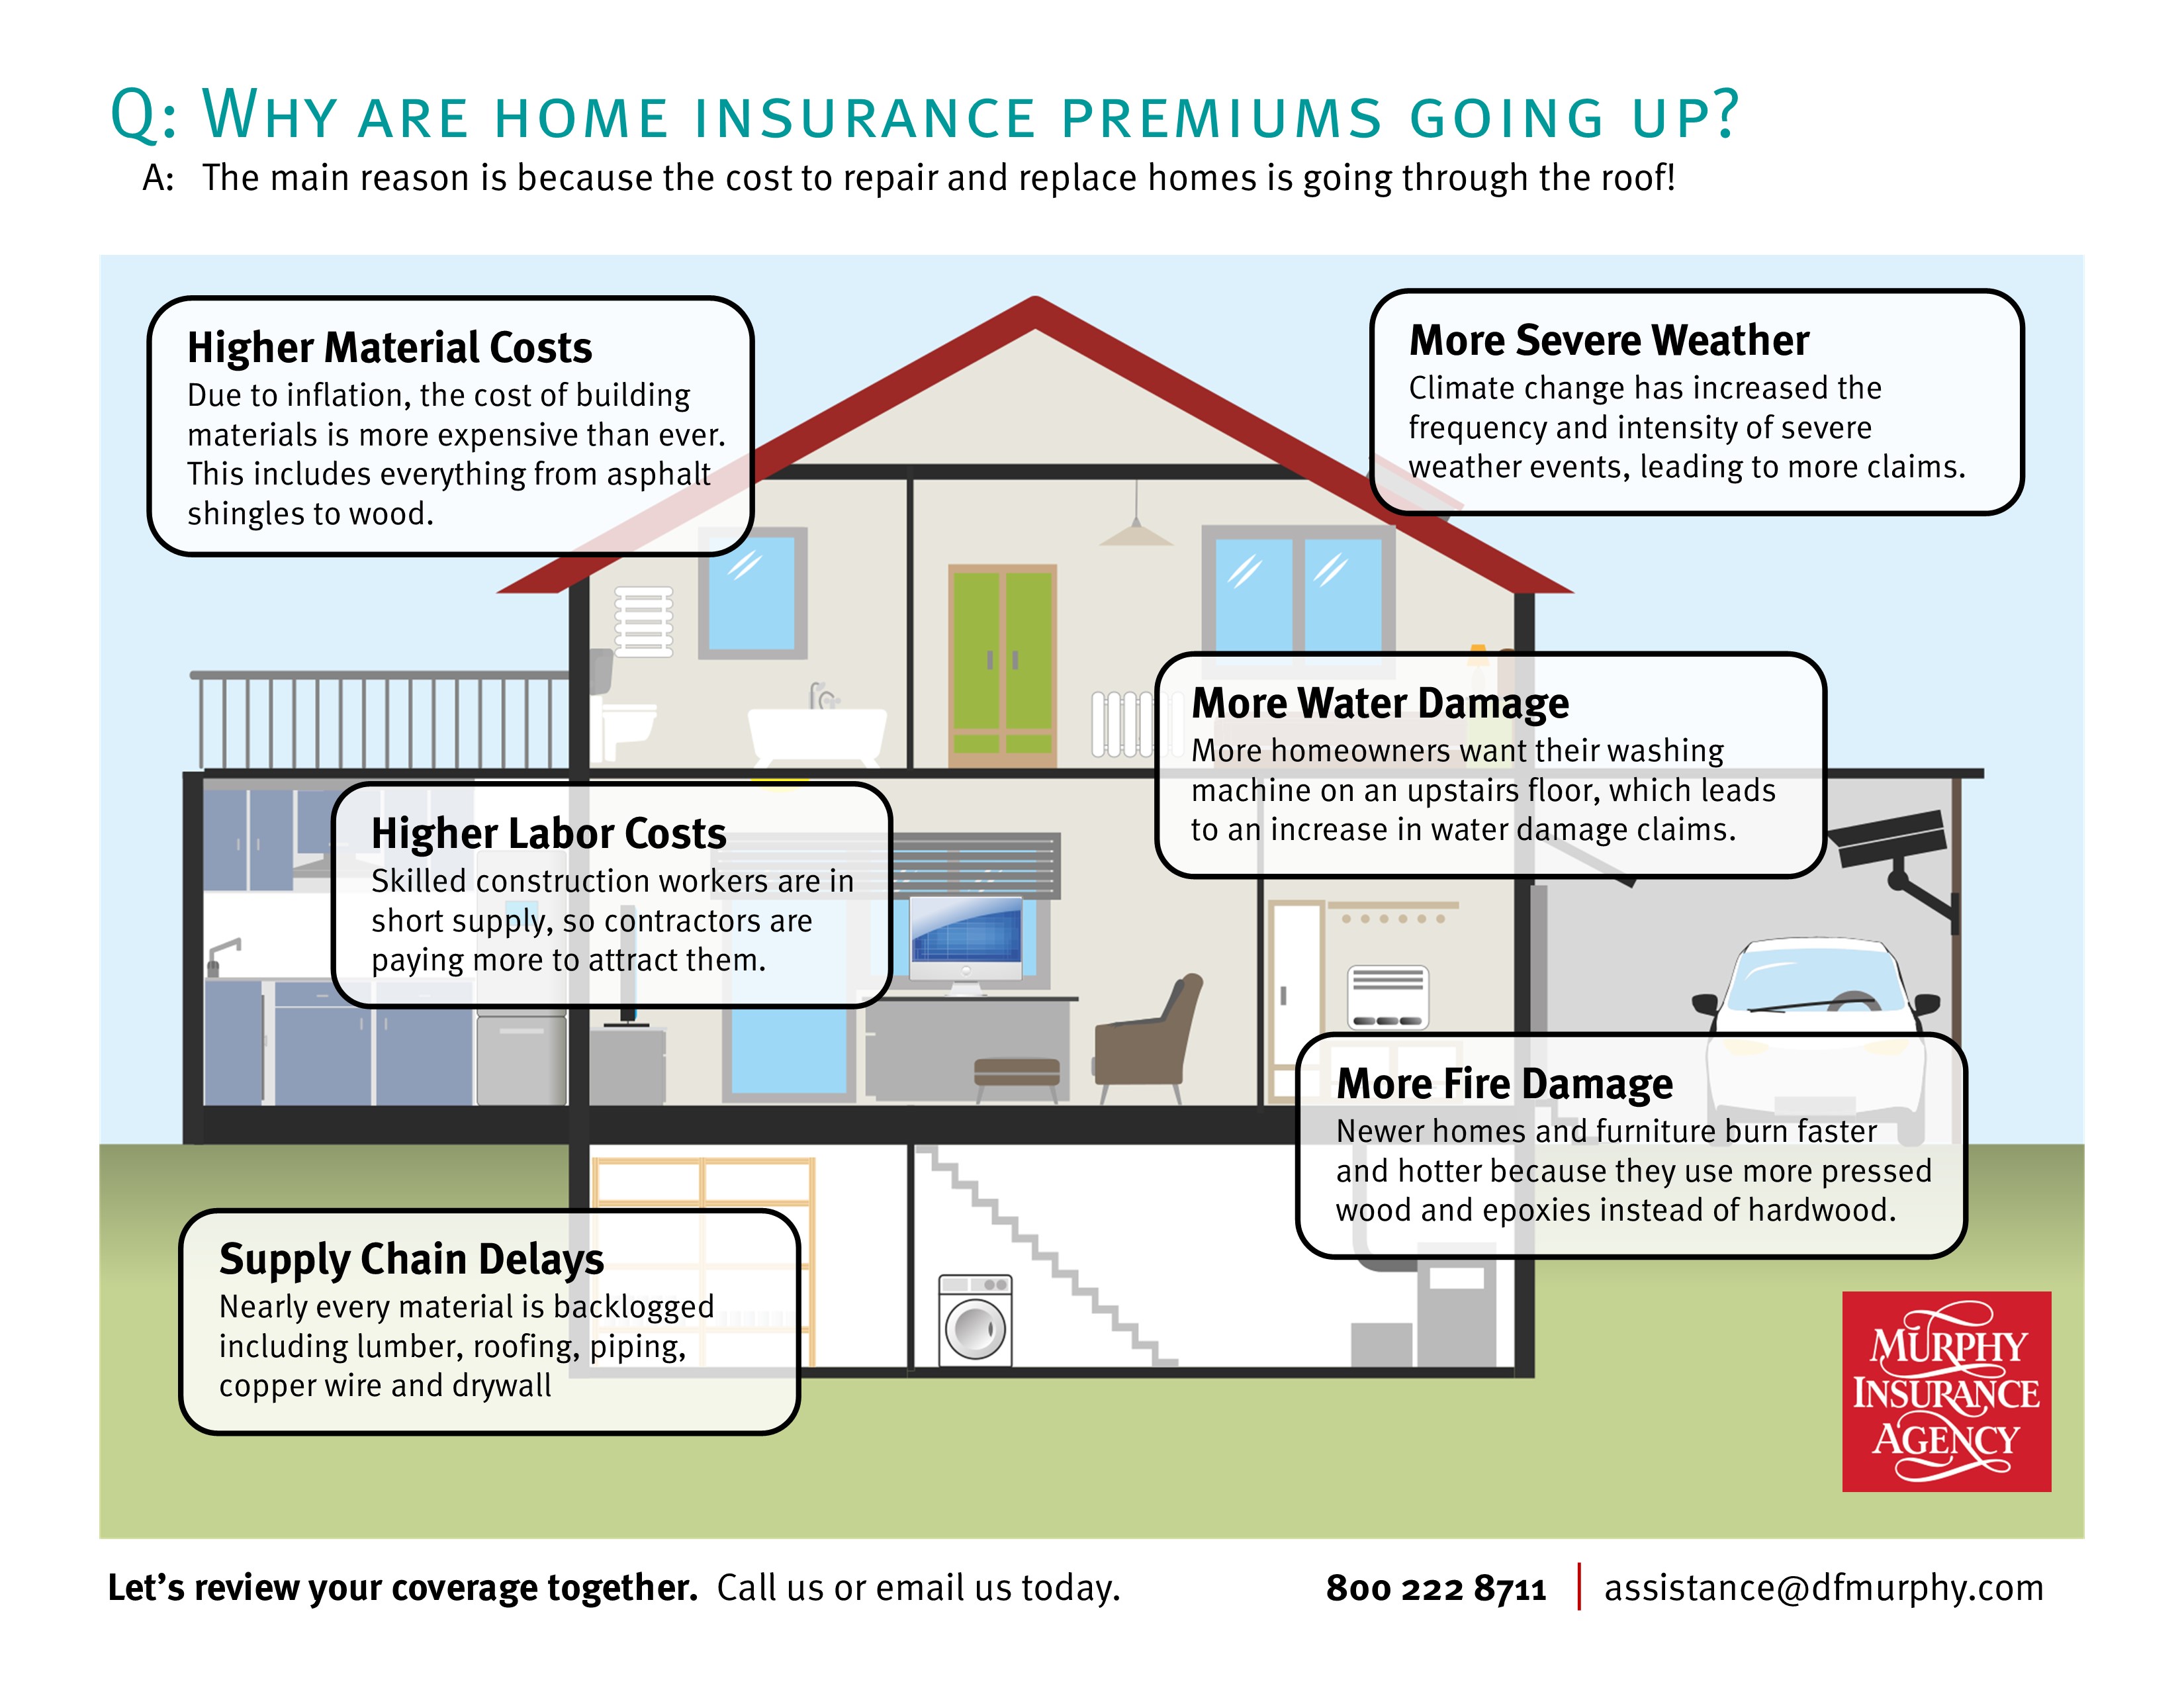 Why are home insurance premiums going up?